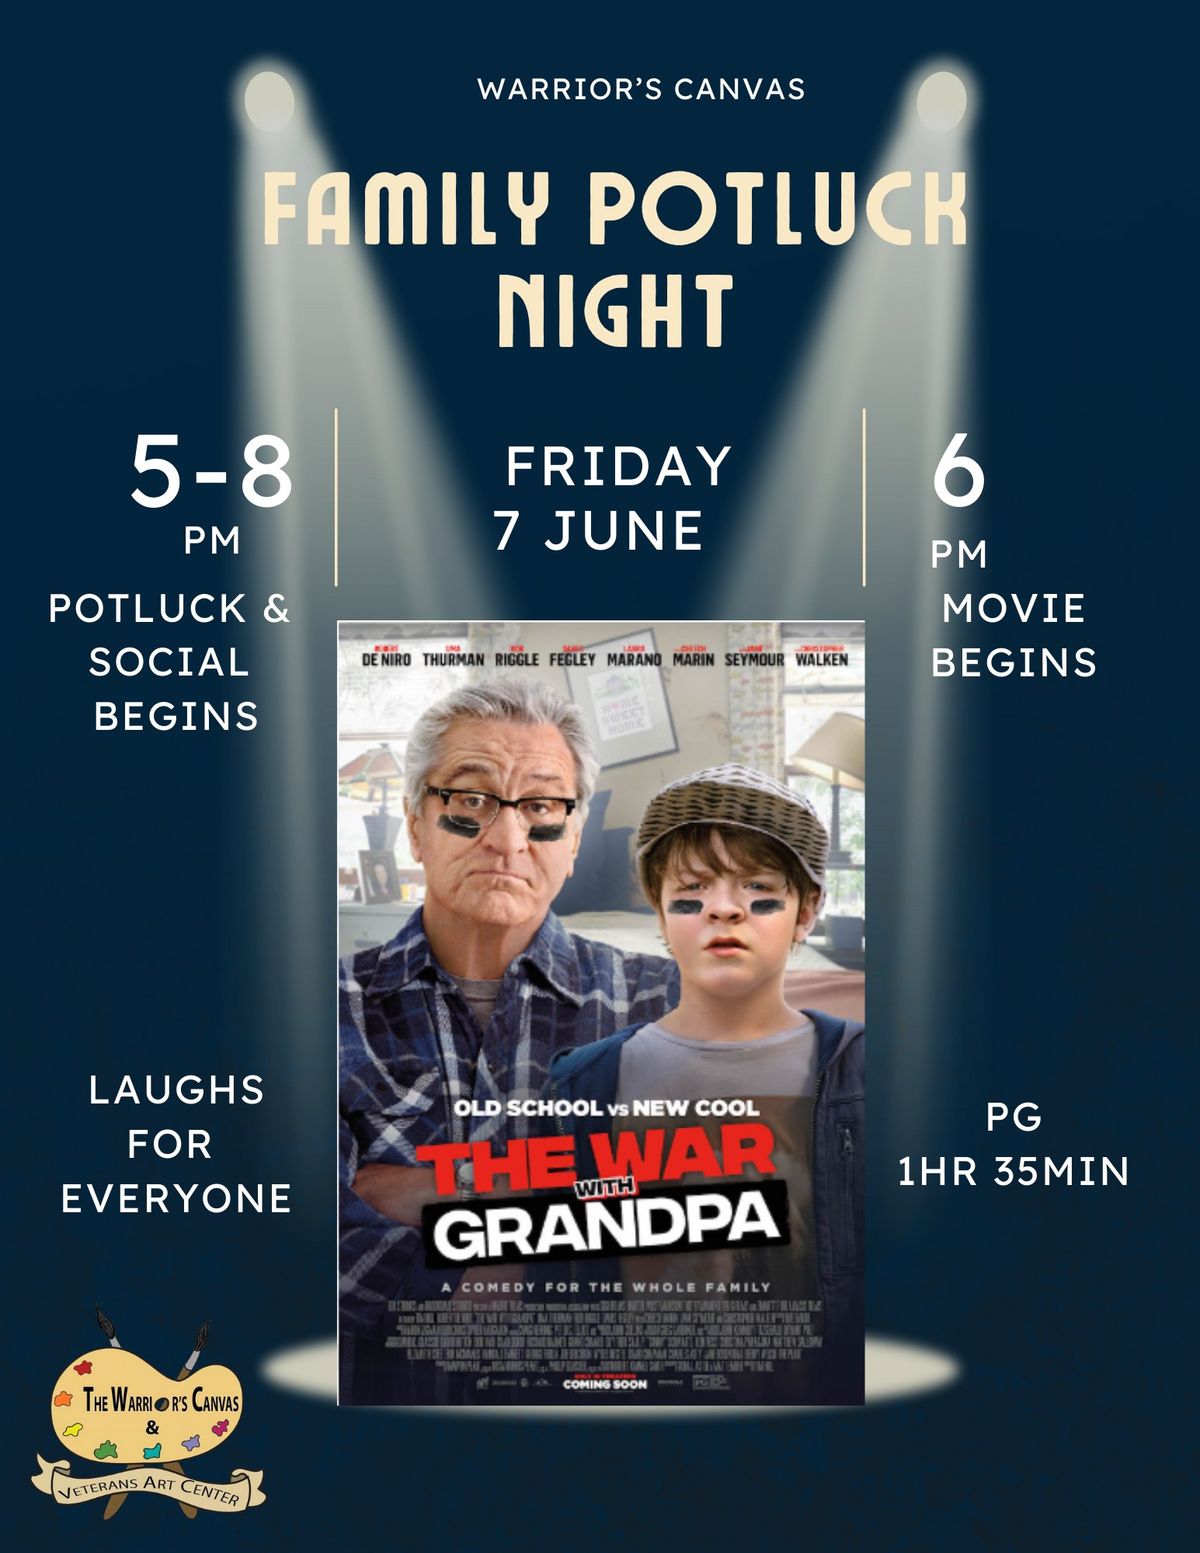 Family Movie & Potluck Night for Veterans, Families, & Supporters